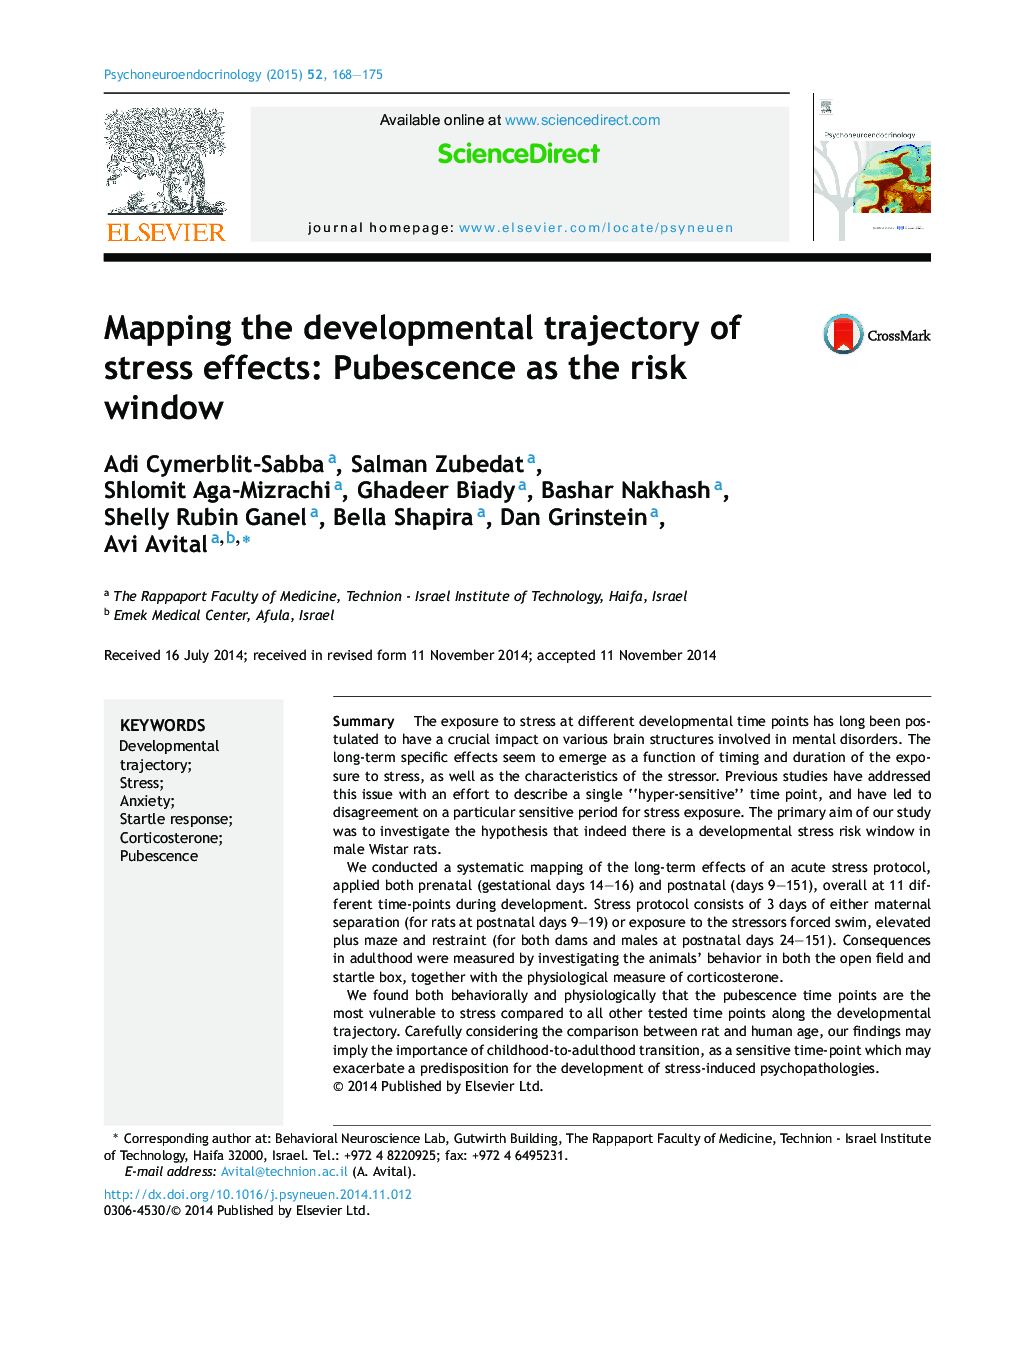 Mapping the developmental trajectory of stress effects: Pubescence as the risk window